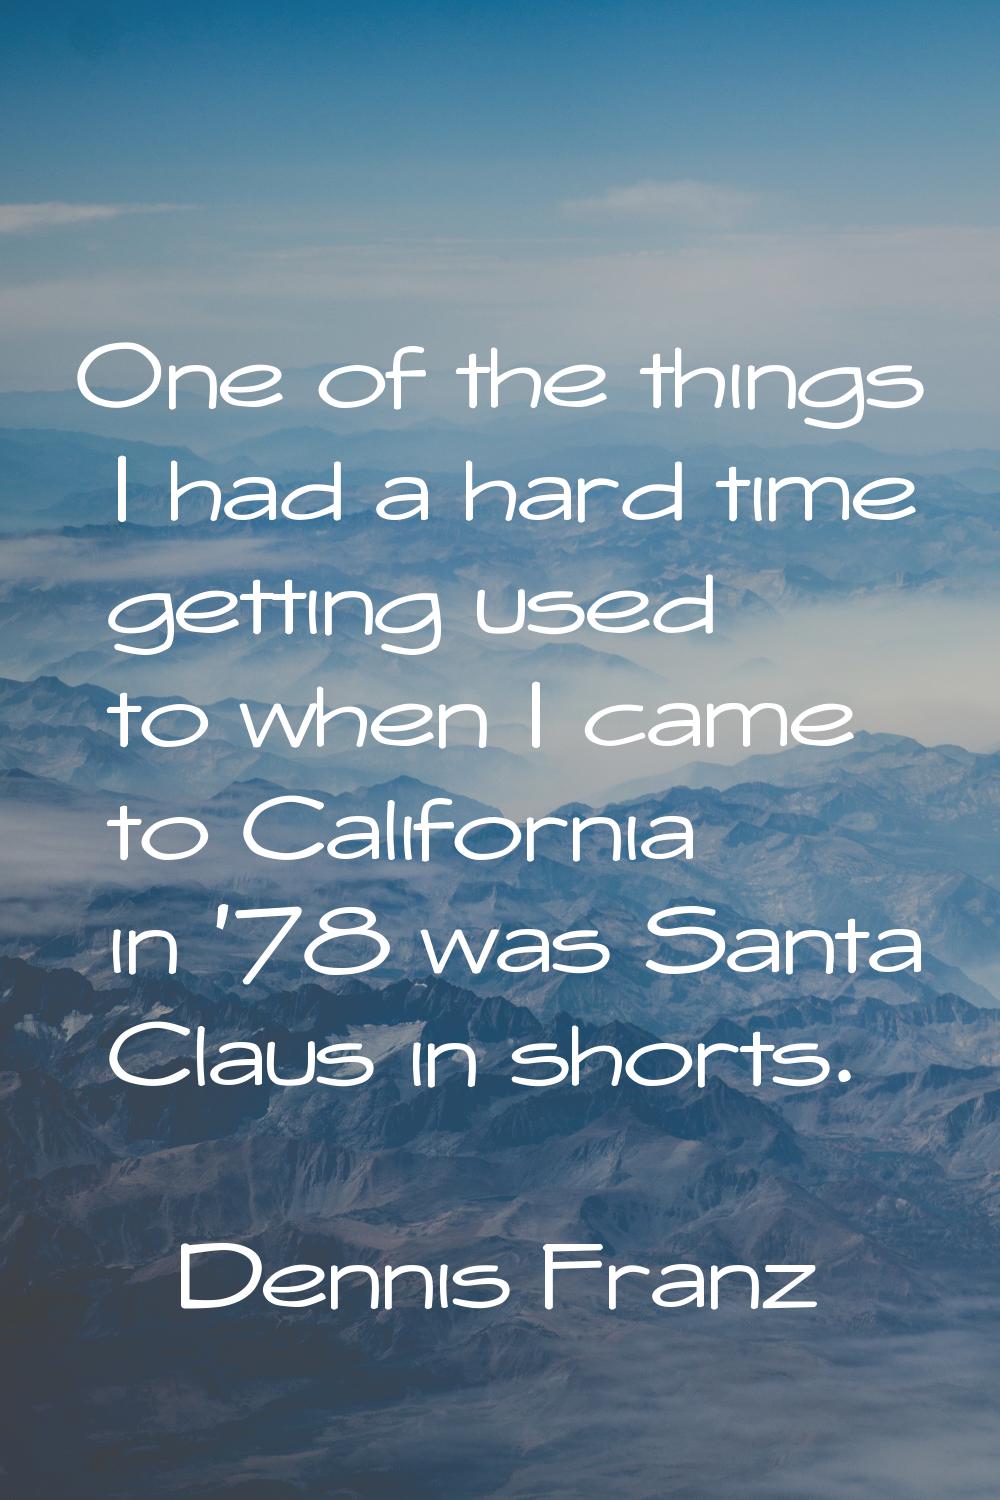 One of the things I had a hard time getting used to when I came to California in '78 was Santa Clau